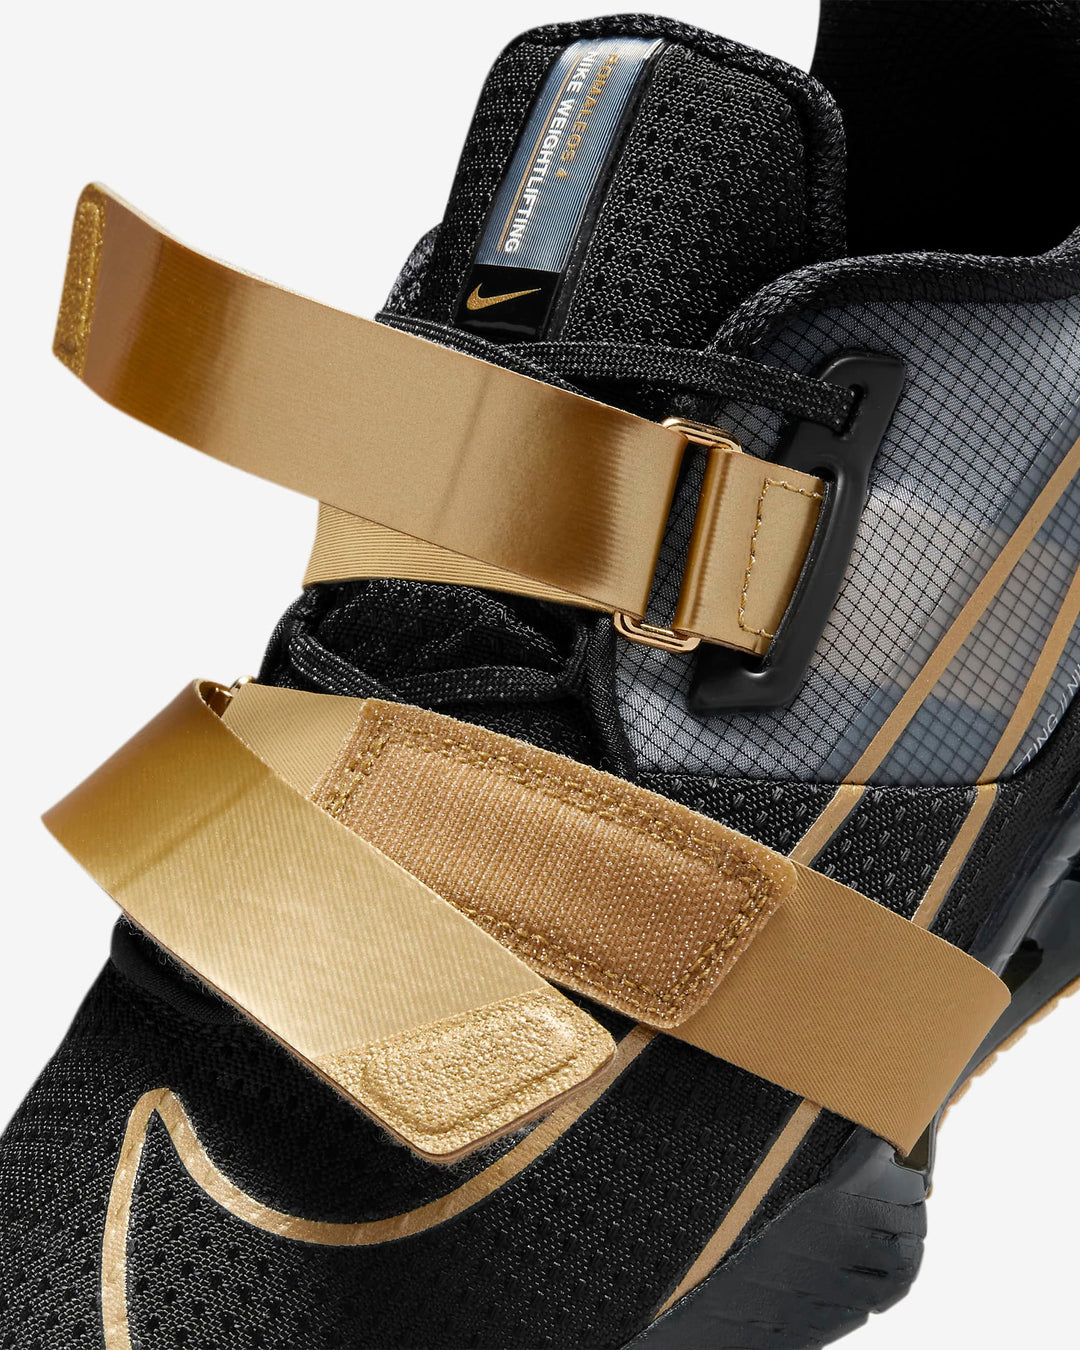 Giày Nike Romaleos 4 Weightlifting Shoes #Metallic Gold